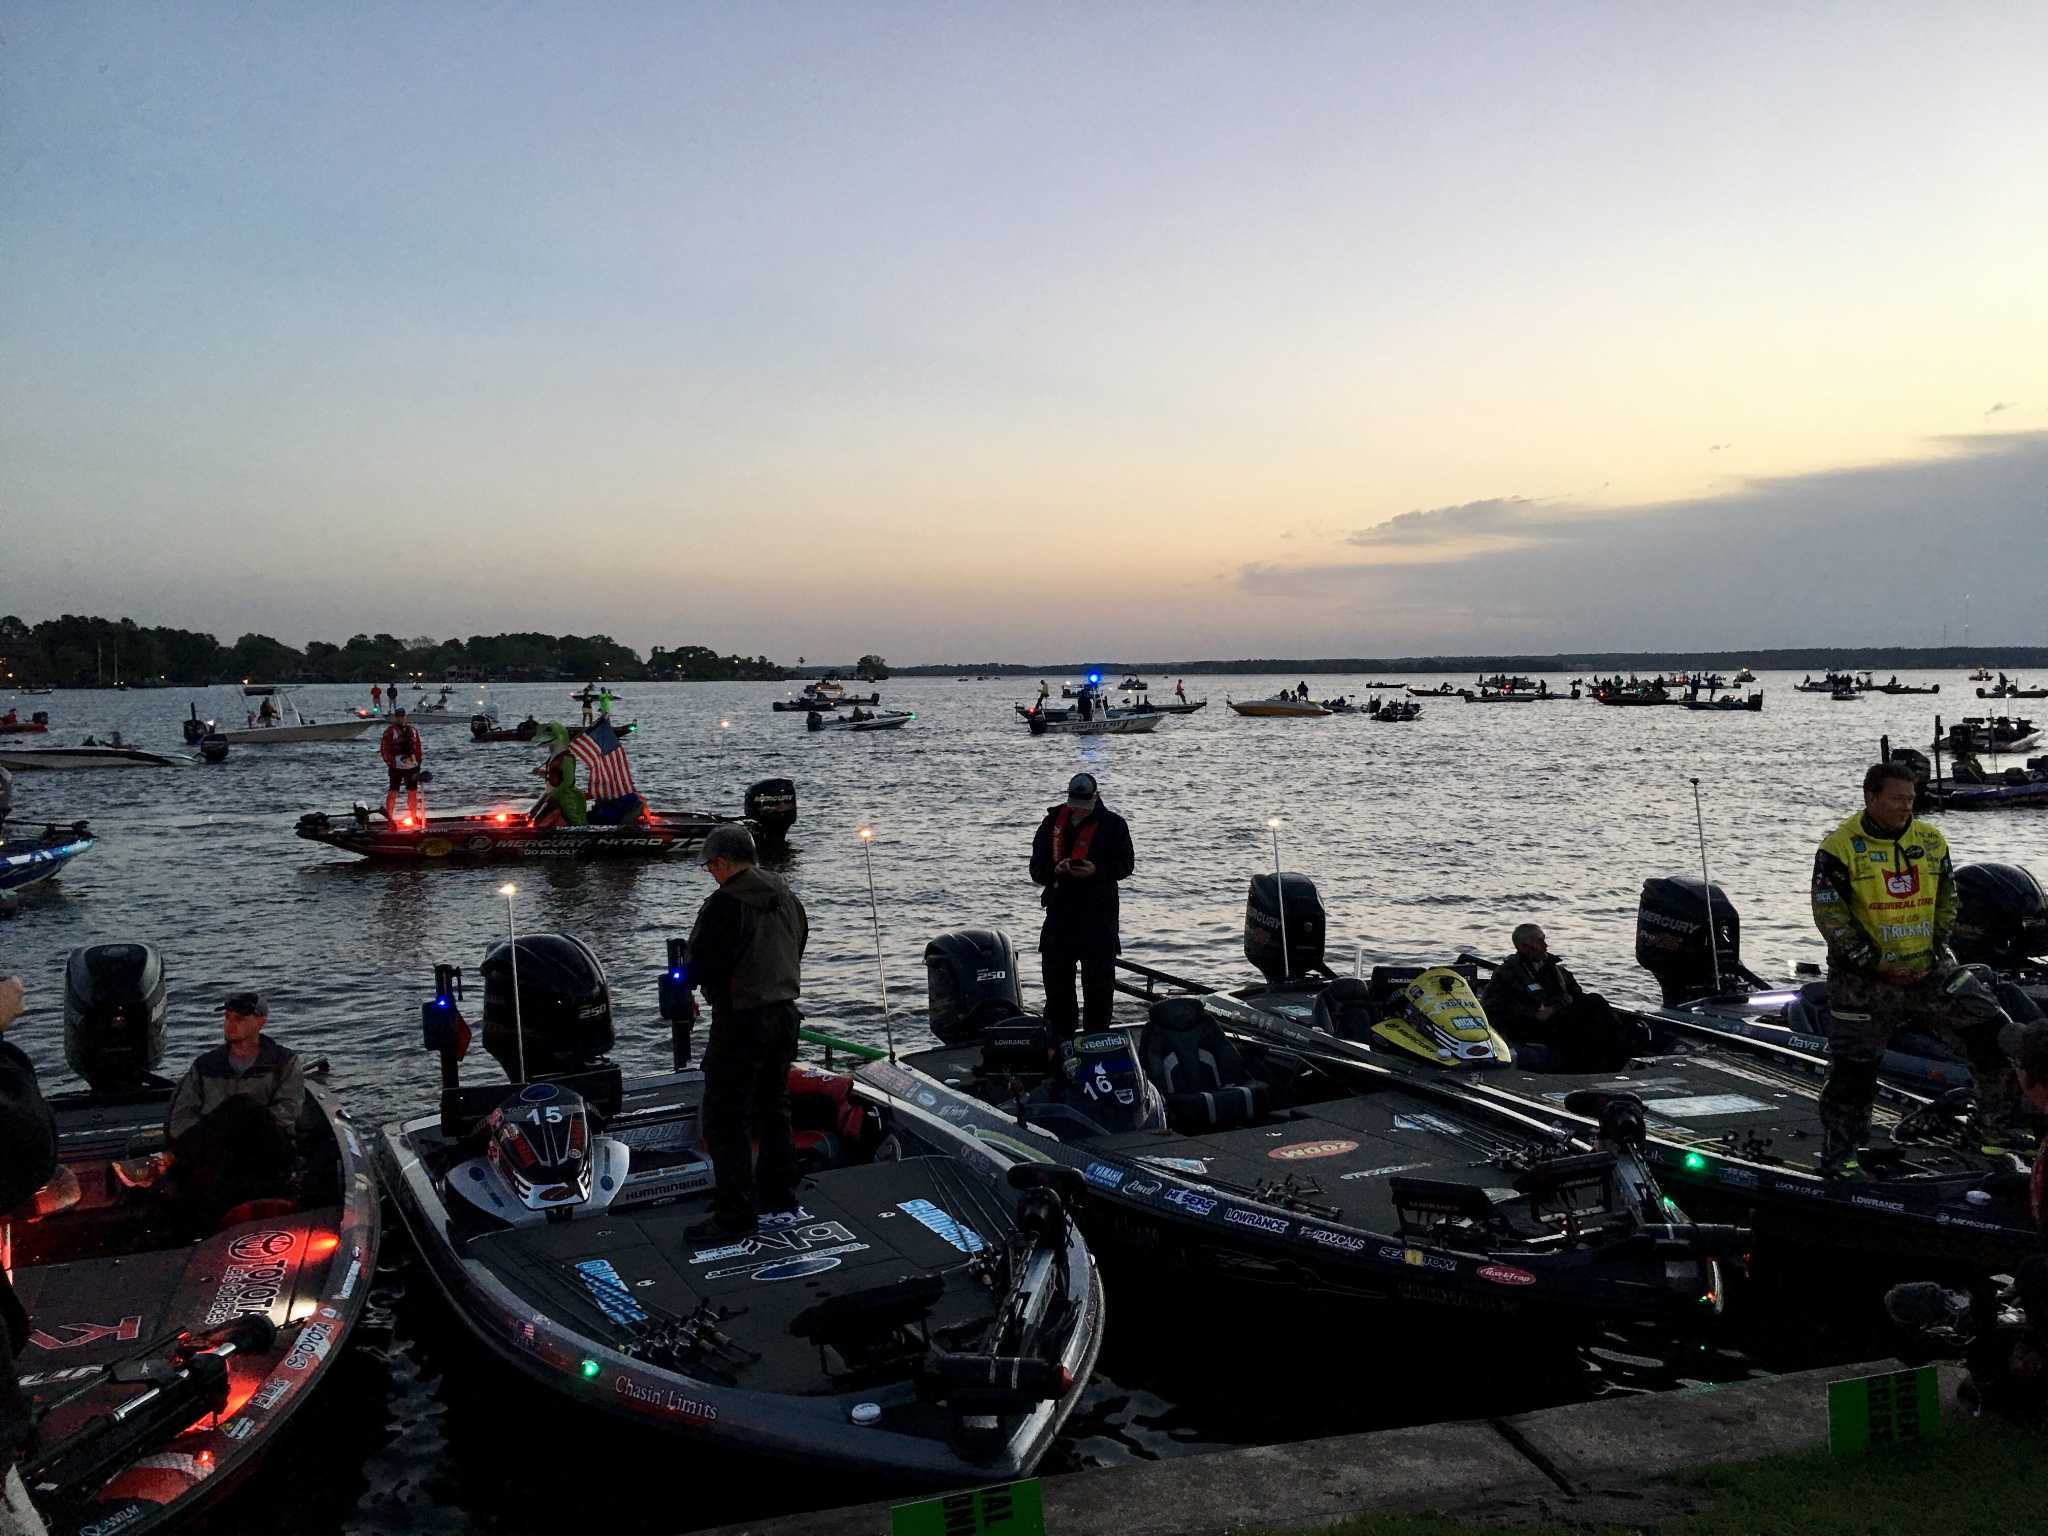 Bassmaster Classic reels in thousands to Lake Conroe